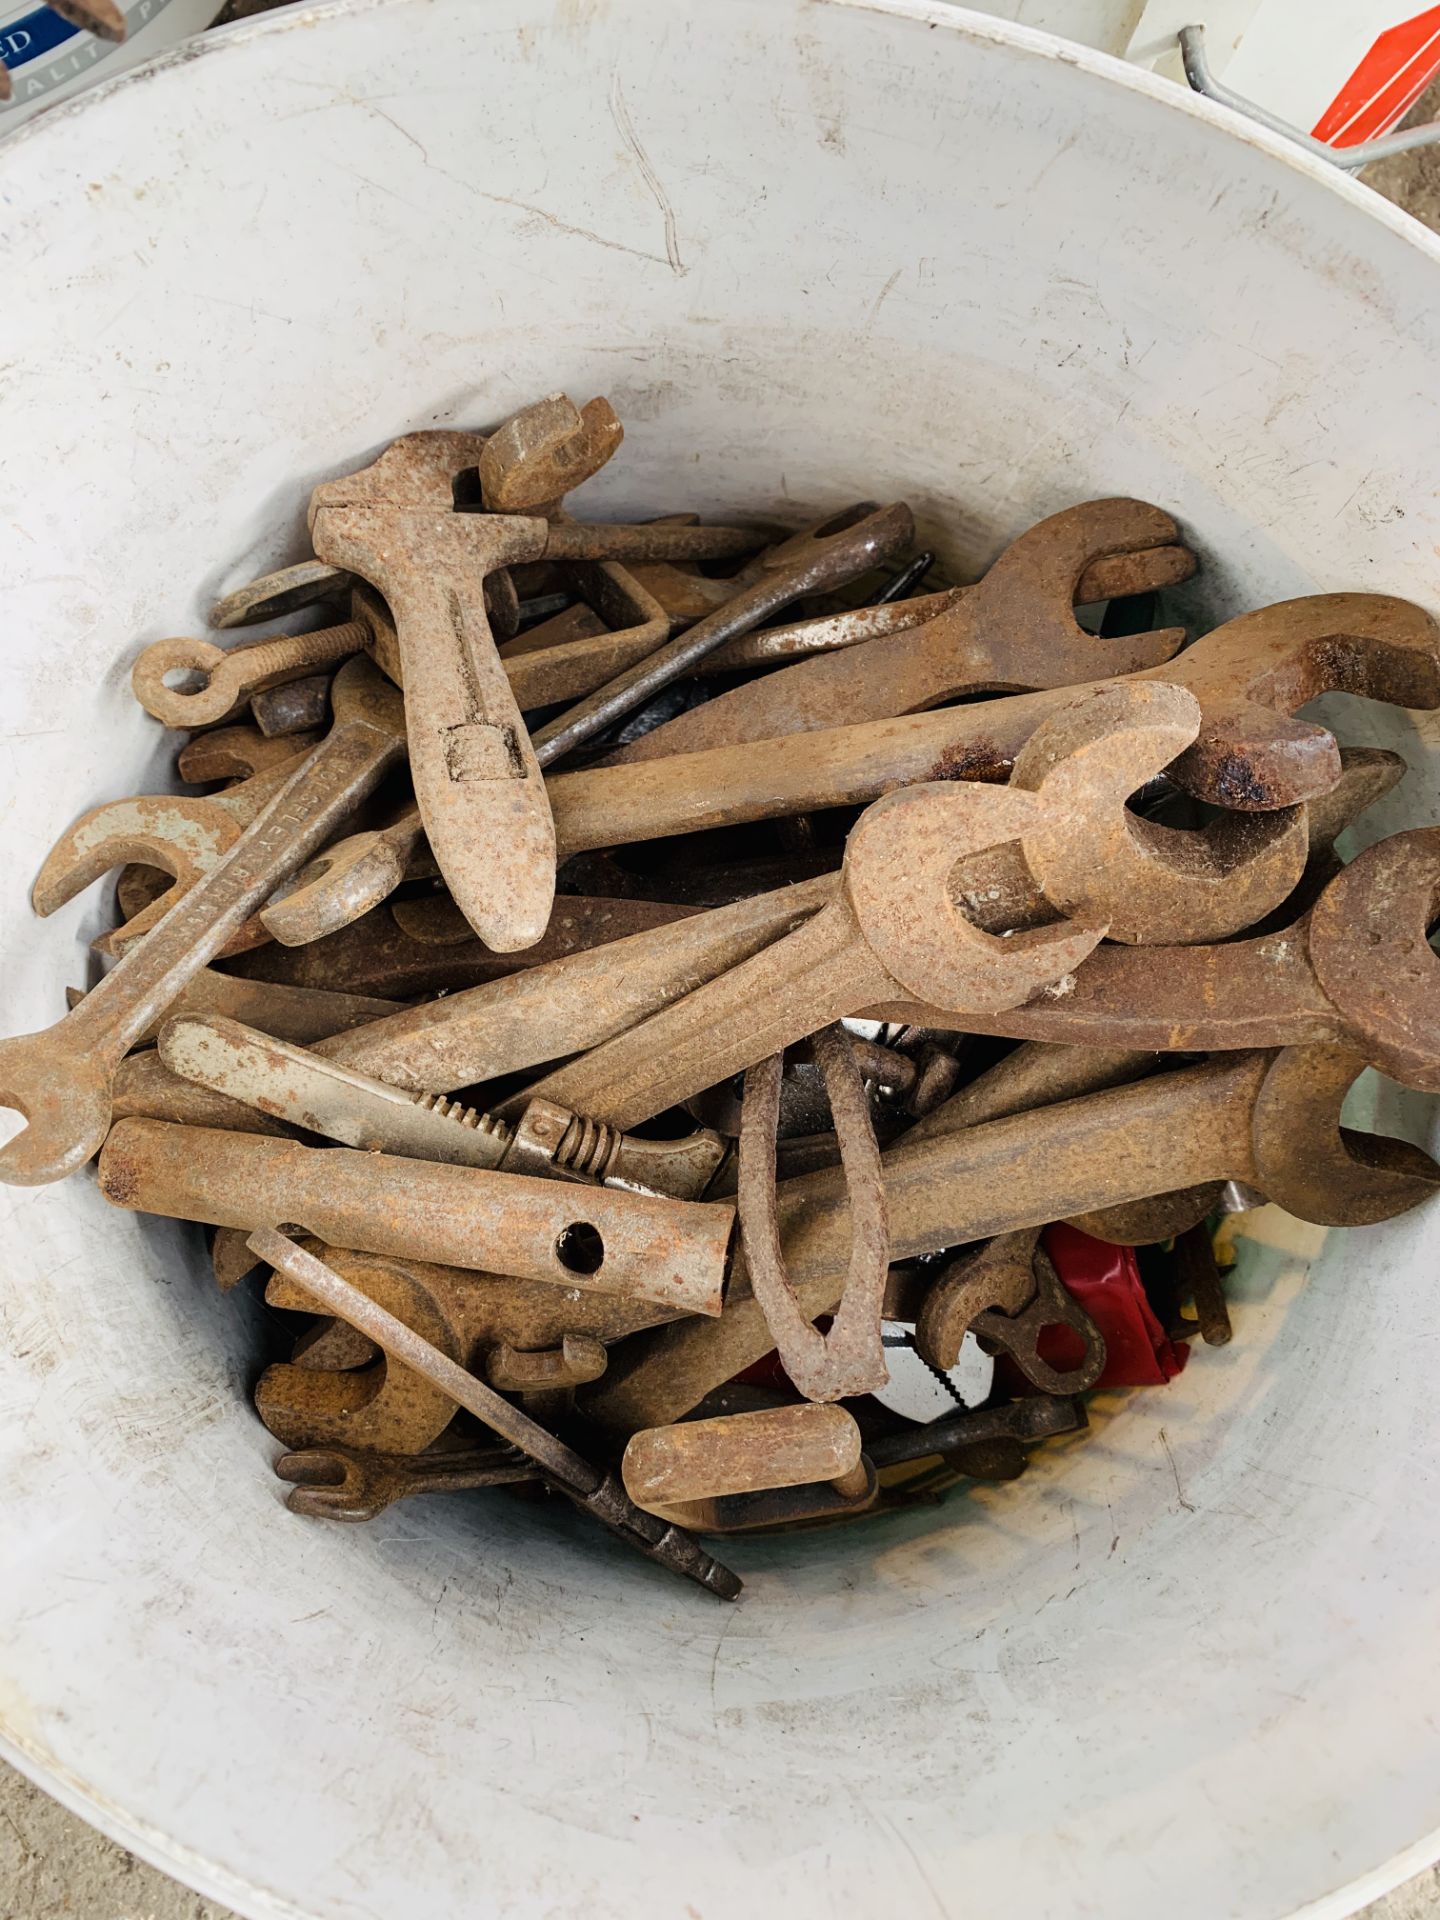 4 buckets containing various tools, spanners, scrapers